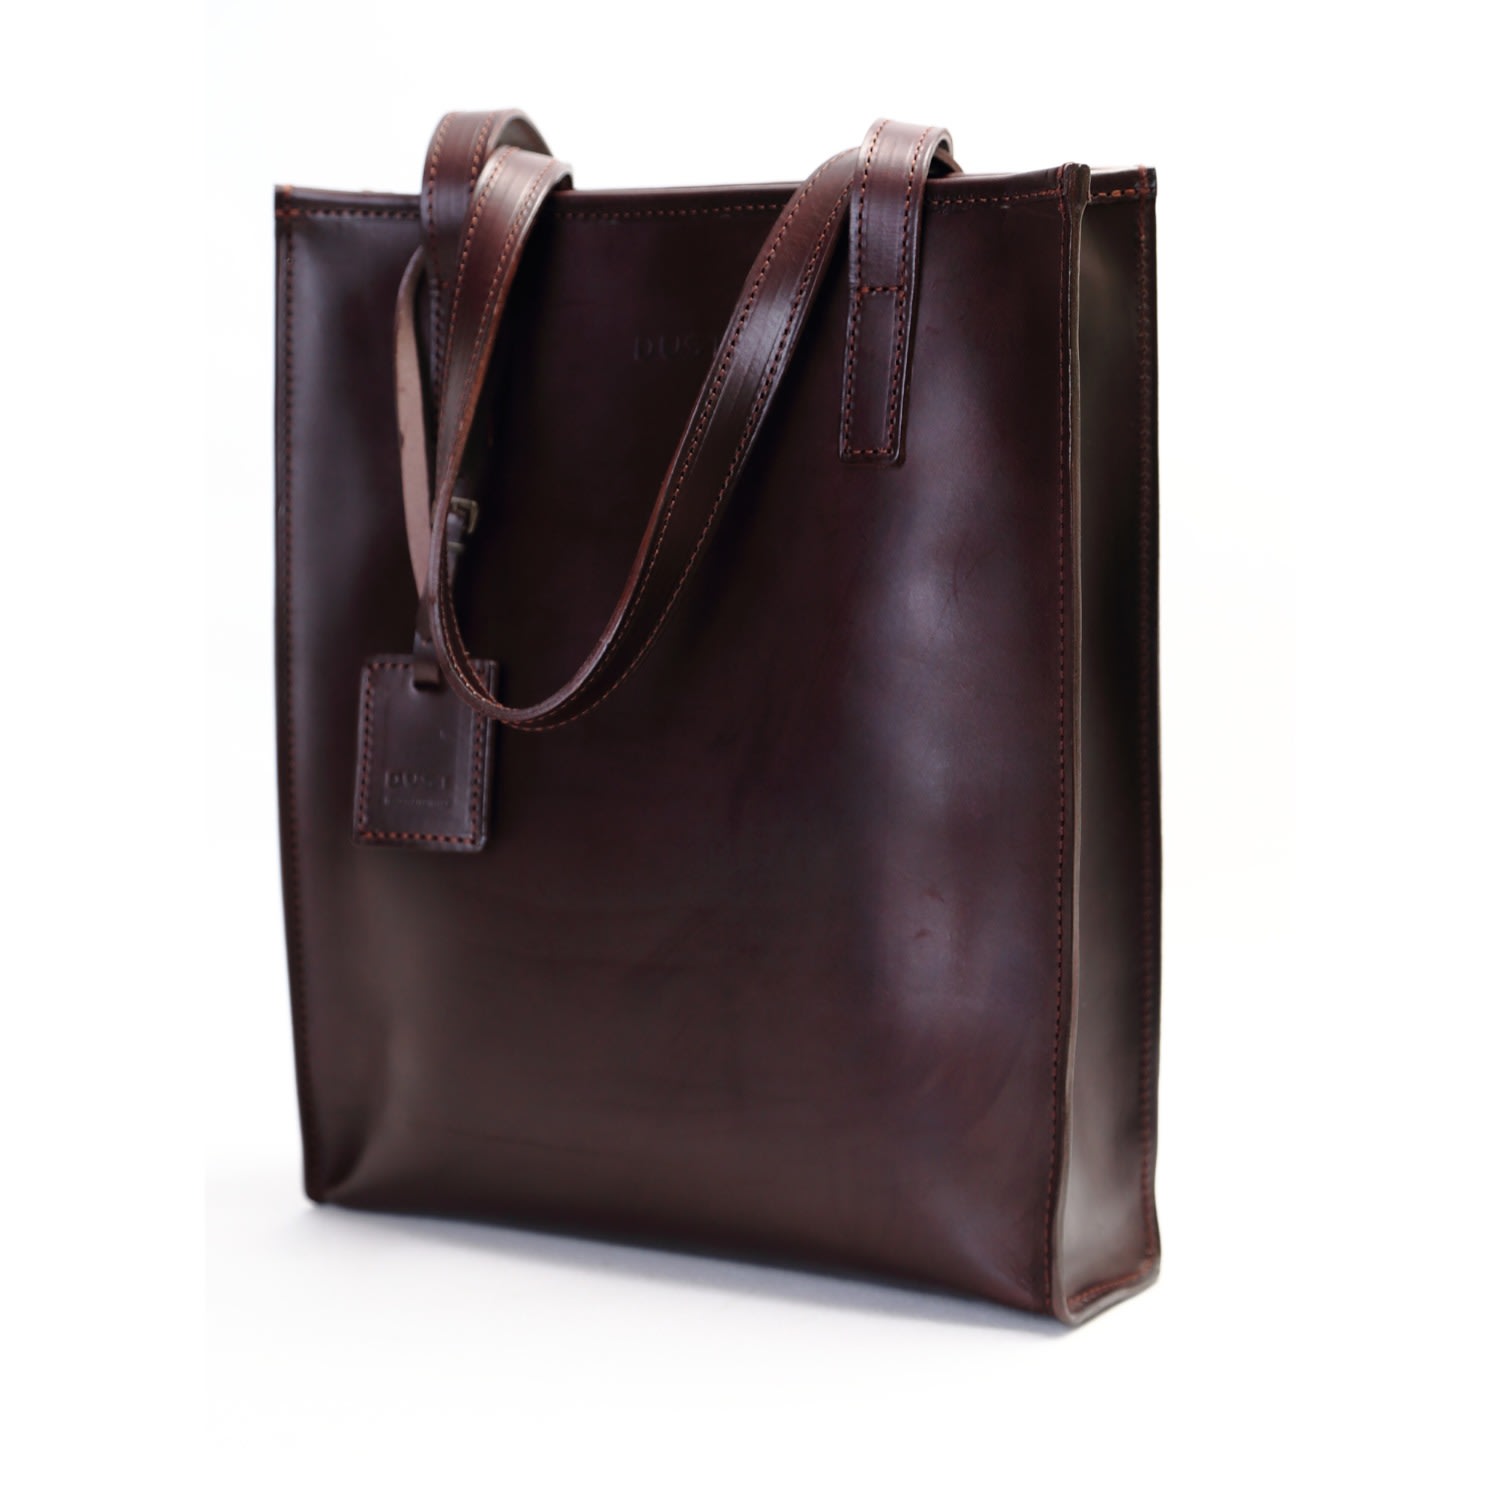 The Dust Company Women's Brown Leather Tote In Cuoio Havana